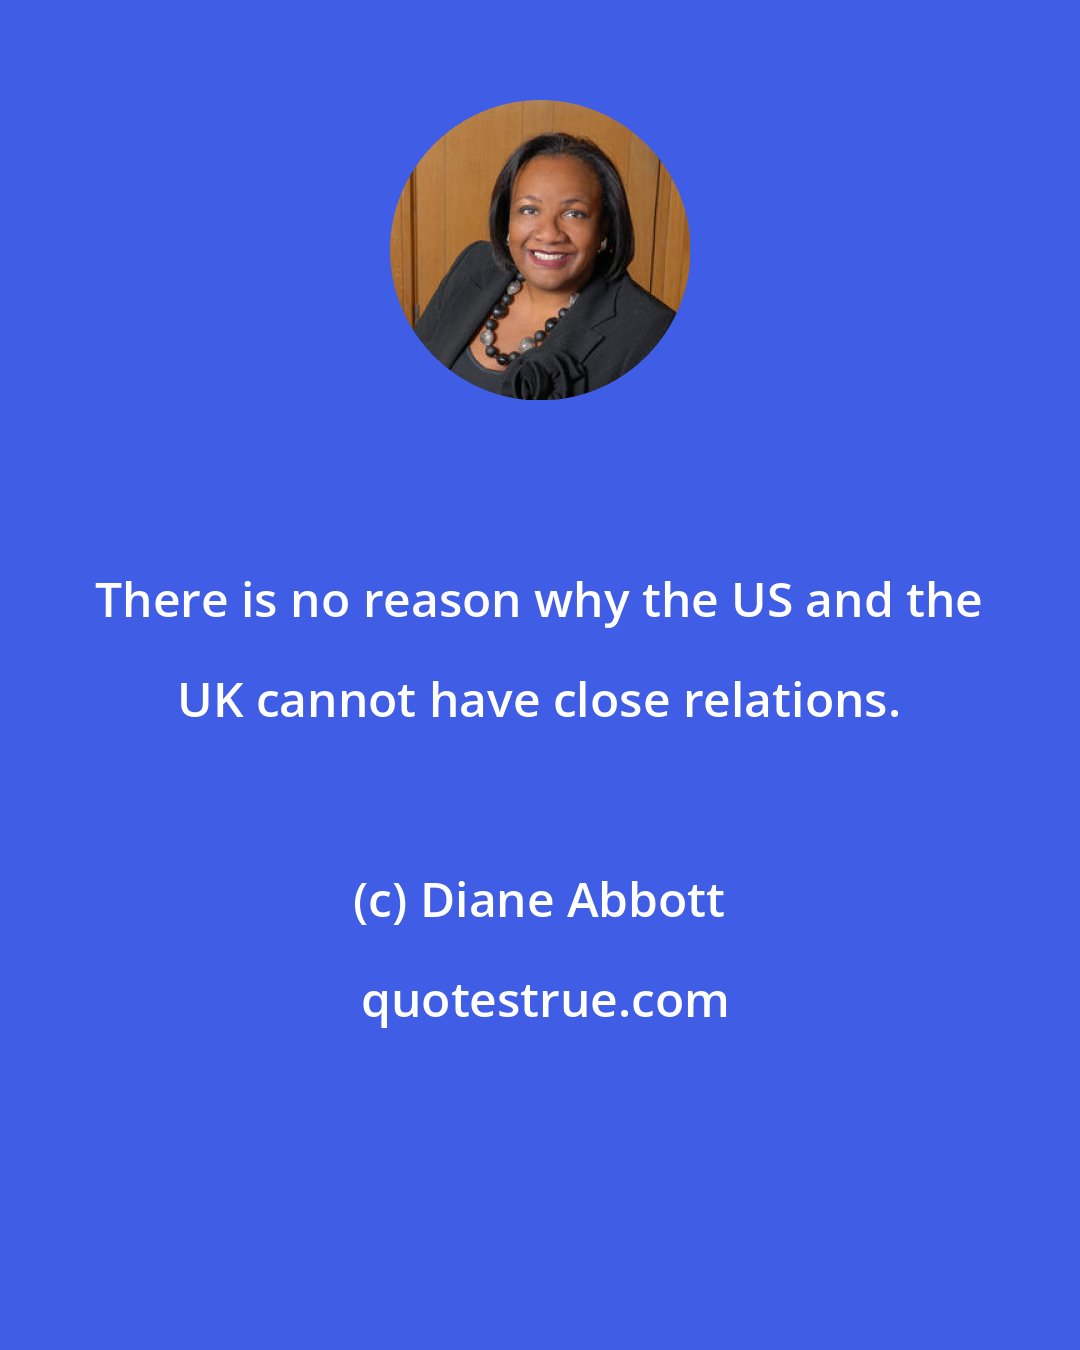 Diane Abbott: There is no reason why the US and the UK cannot have close relations.